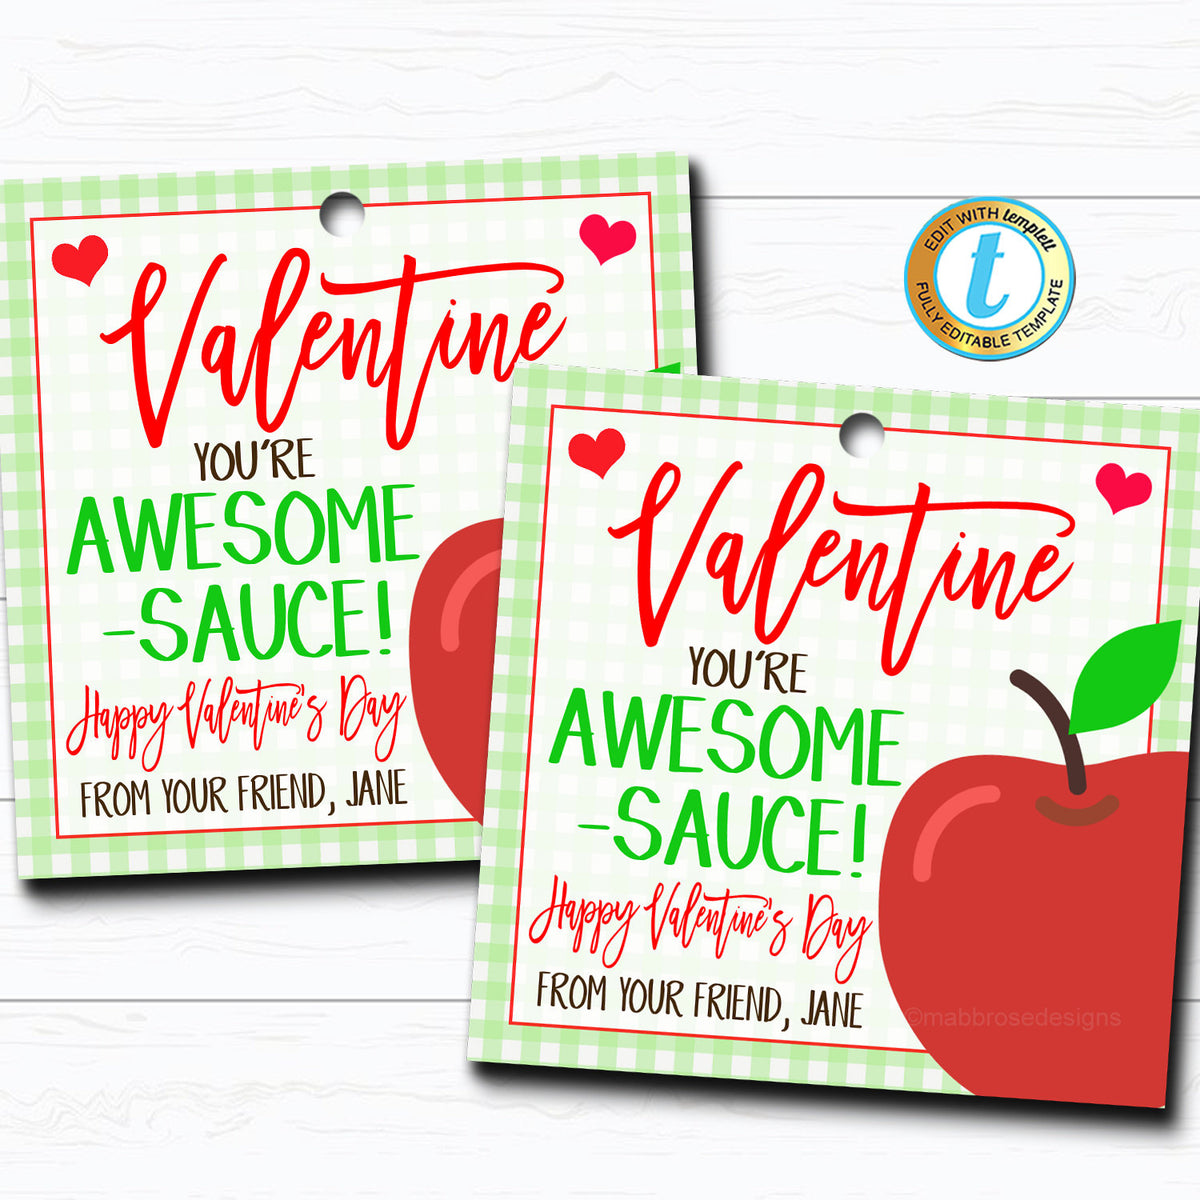 Valentine Applesauce Tag You #39 re Awesome Sauce Printable TidyLady